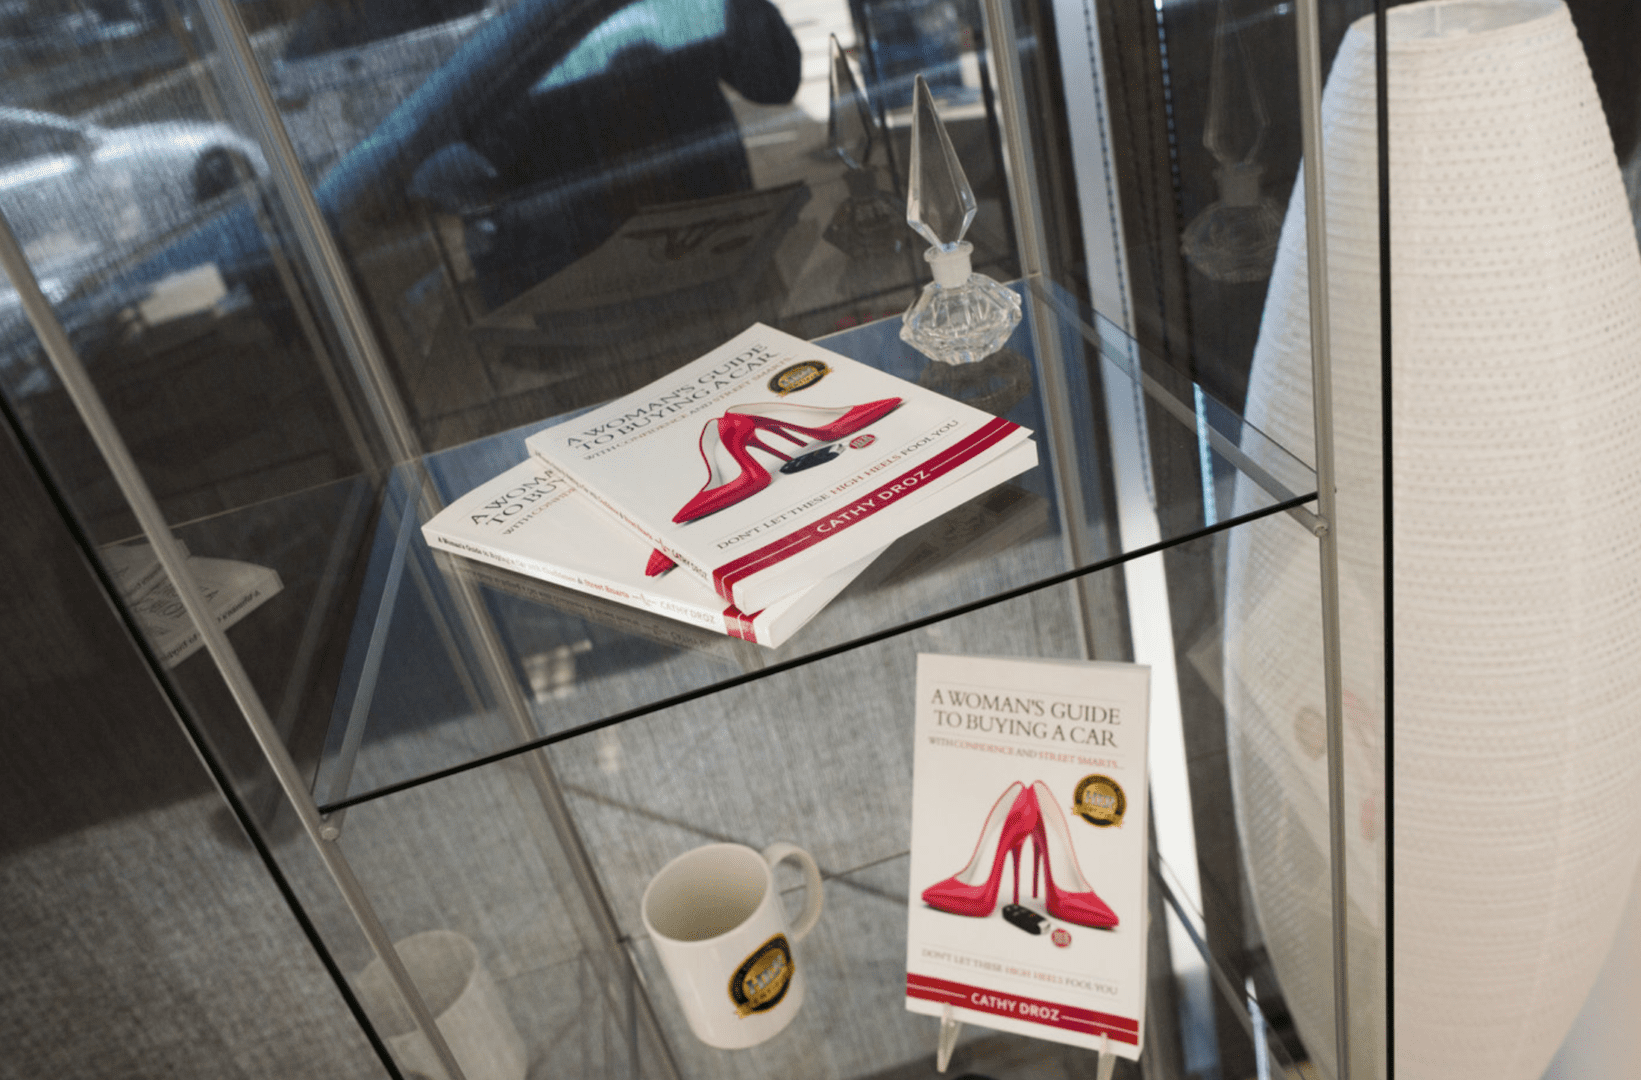 A book titled "a woman's guide to buying a car" by cathy droz is displayed on a glass shelf near a white mug.